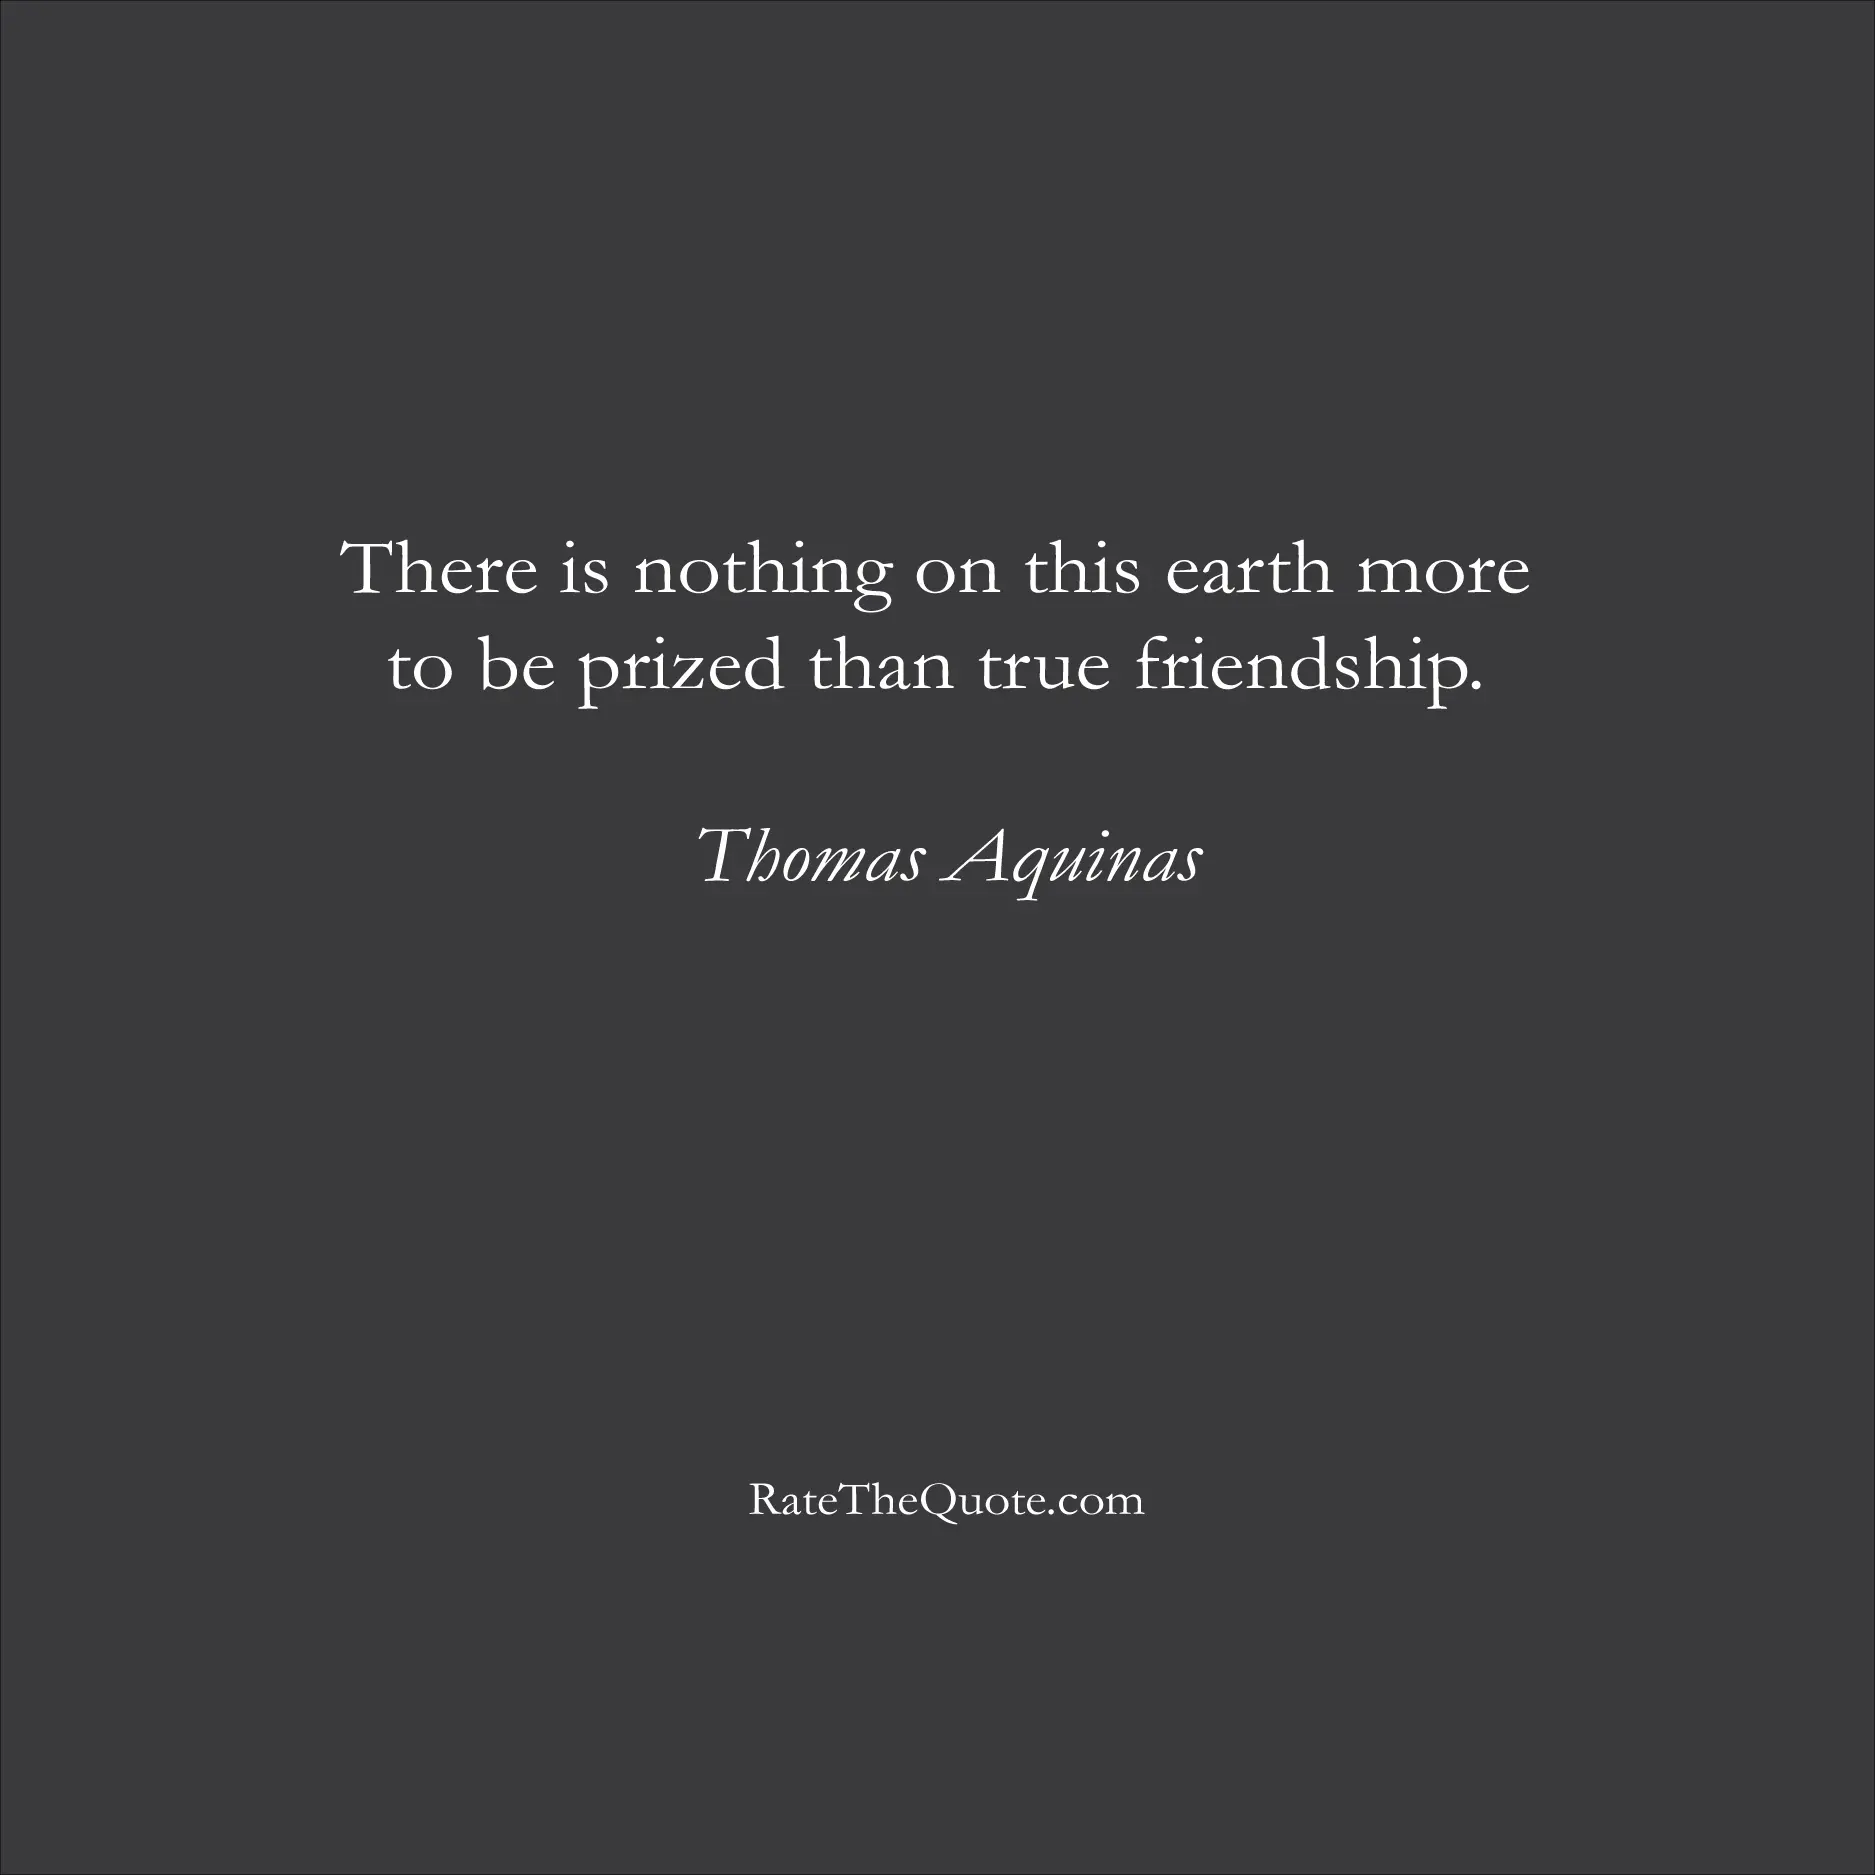 Friendship Quotes There is nothing on this earth more to be prized than true friendship. Thomas Aquinas